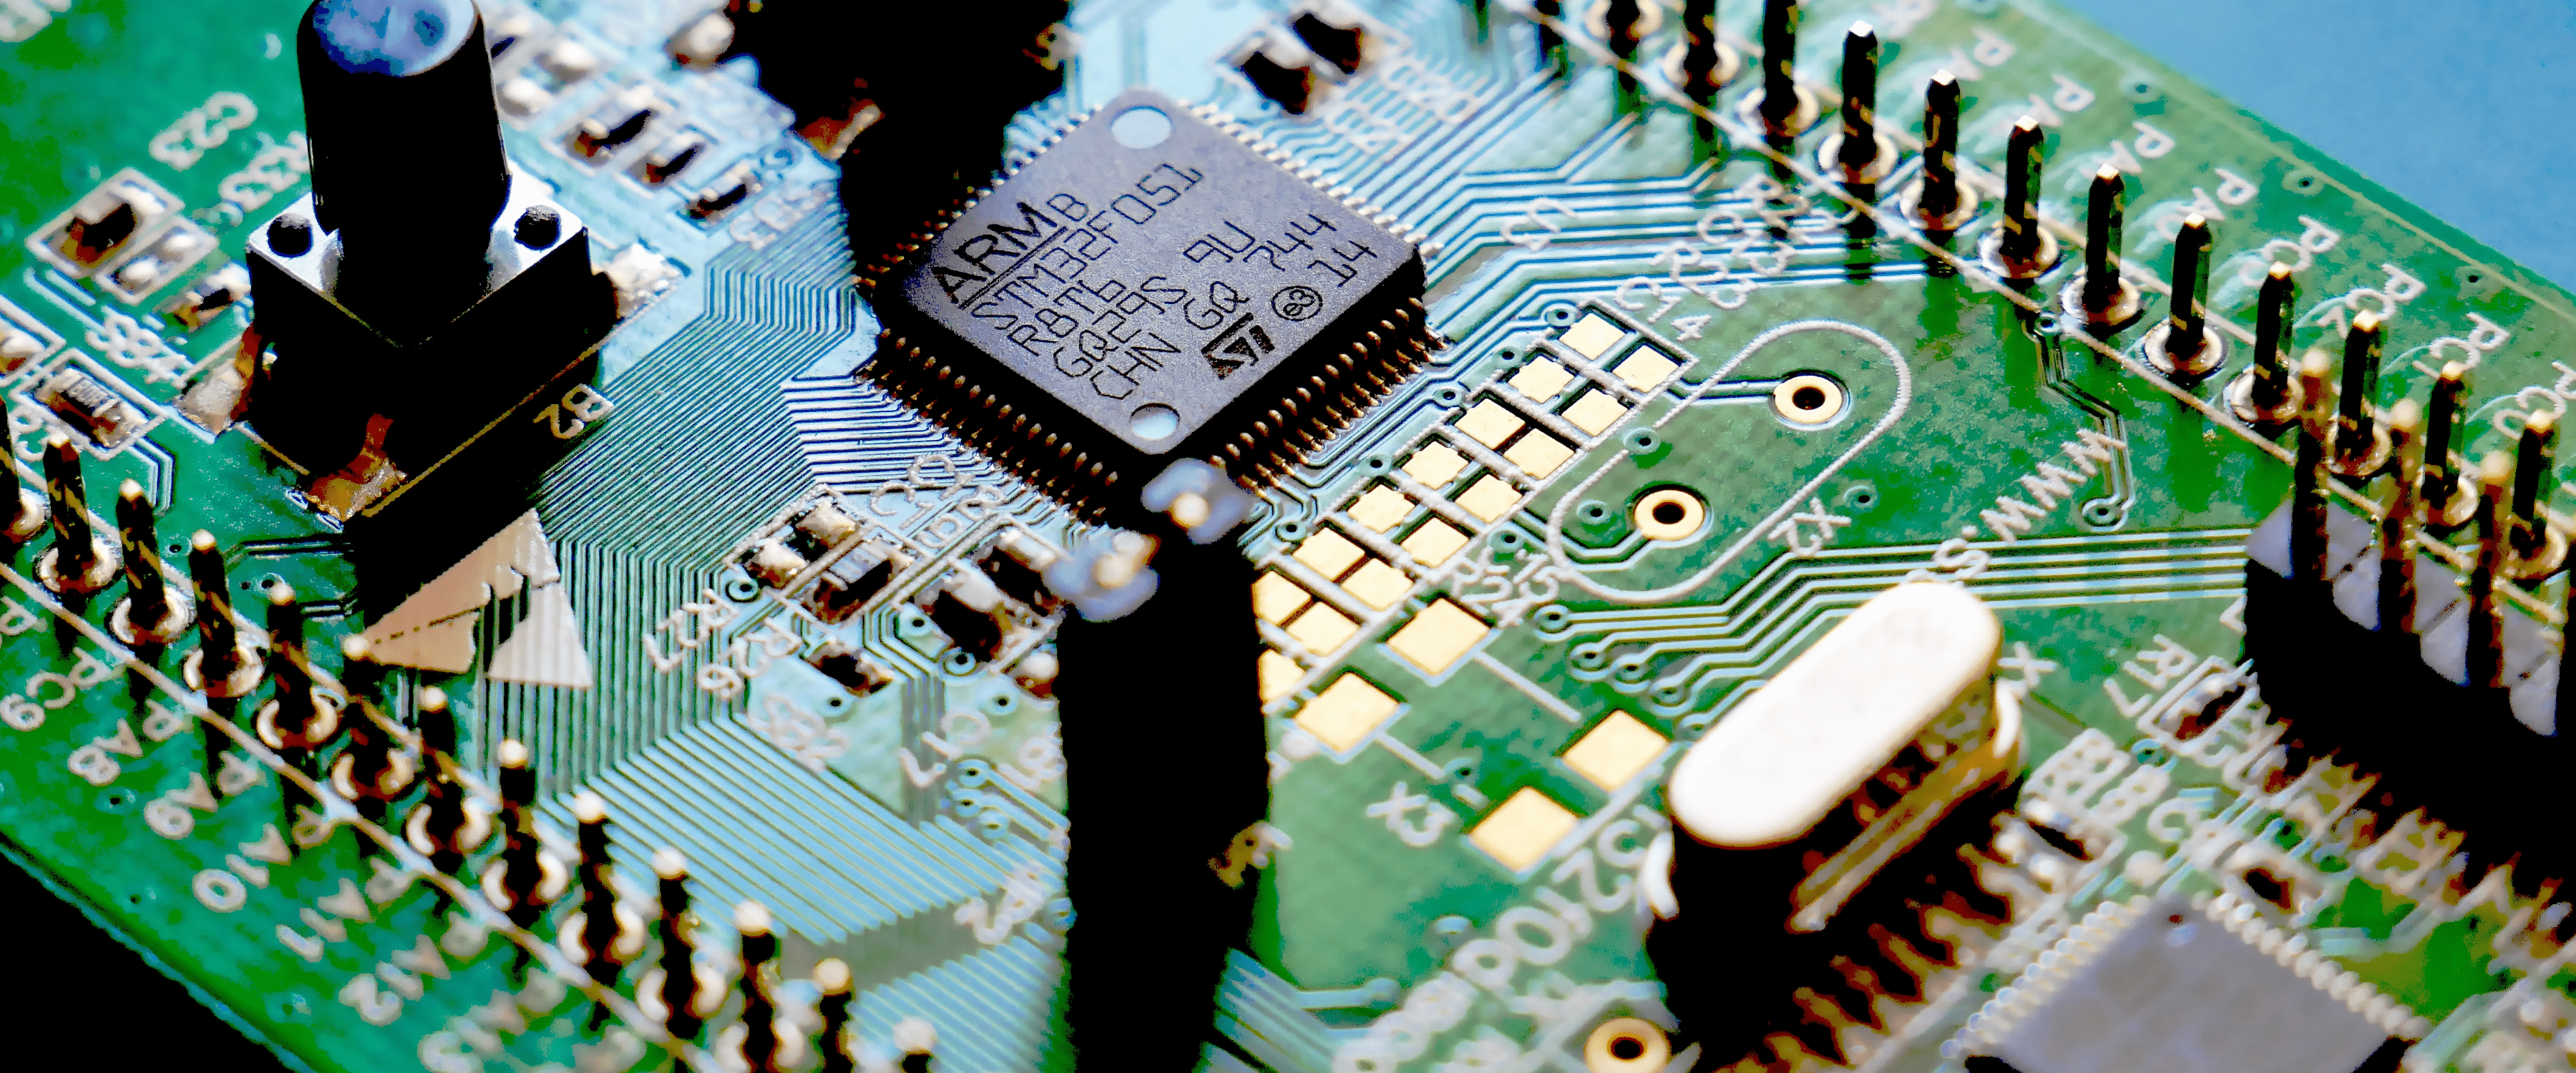 Using off-the-shelf IoT development boards is a sure-fire way to test your Internet of Things idea without breaking the bank. Source: Unsplash 